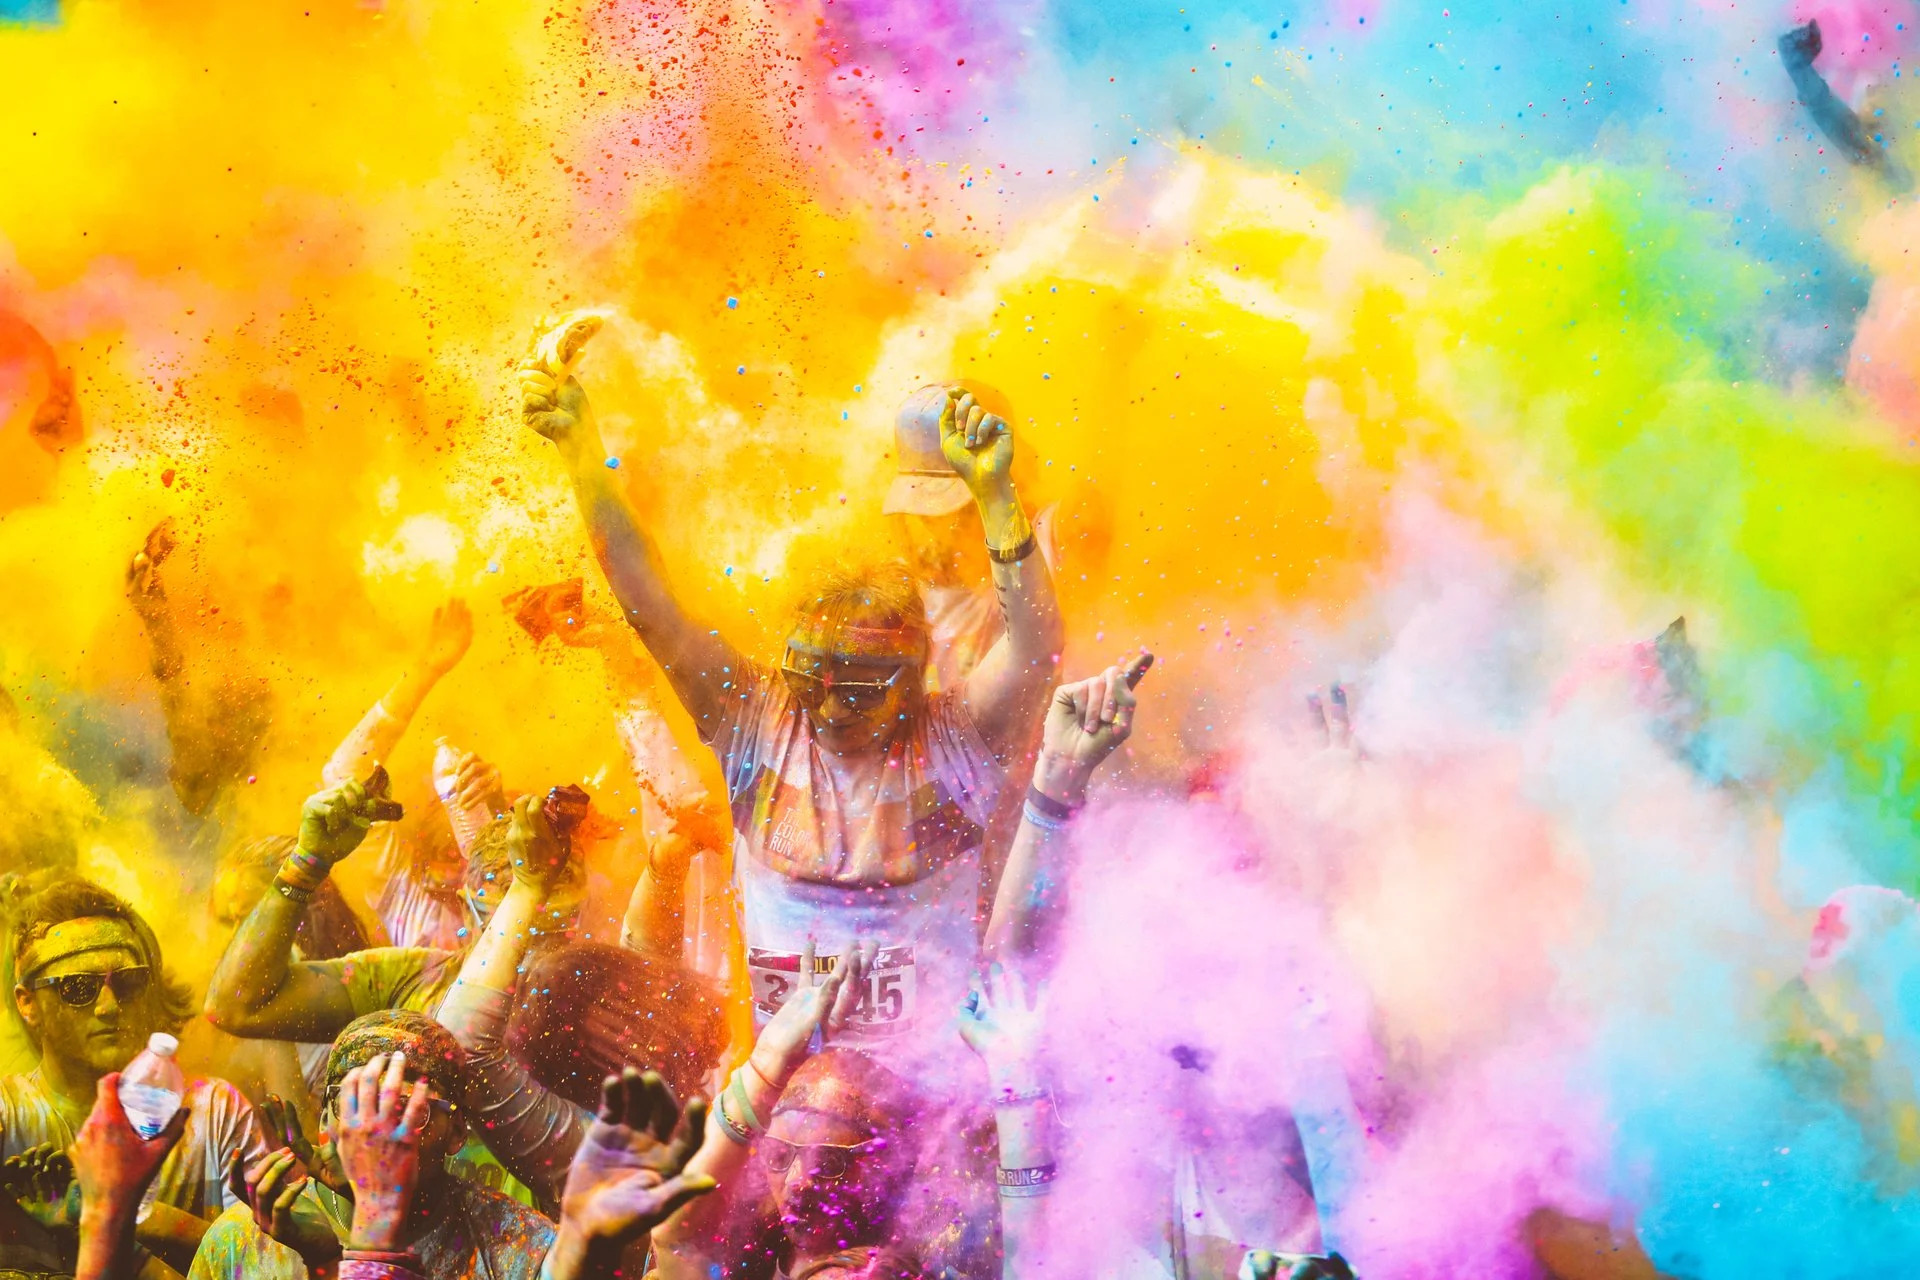 People with their arms raised, covered with colored powder.